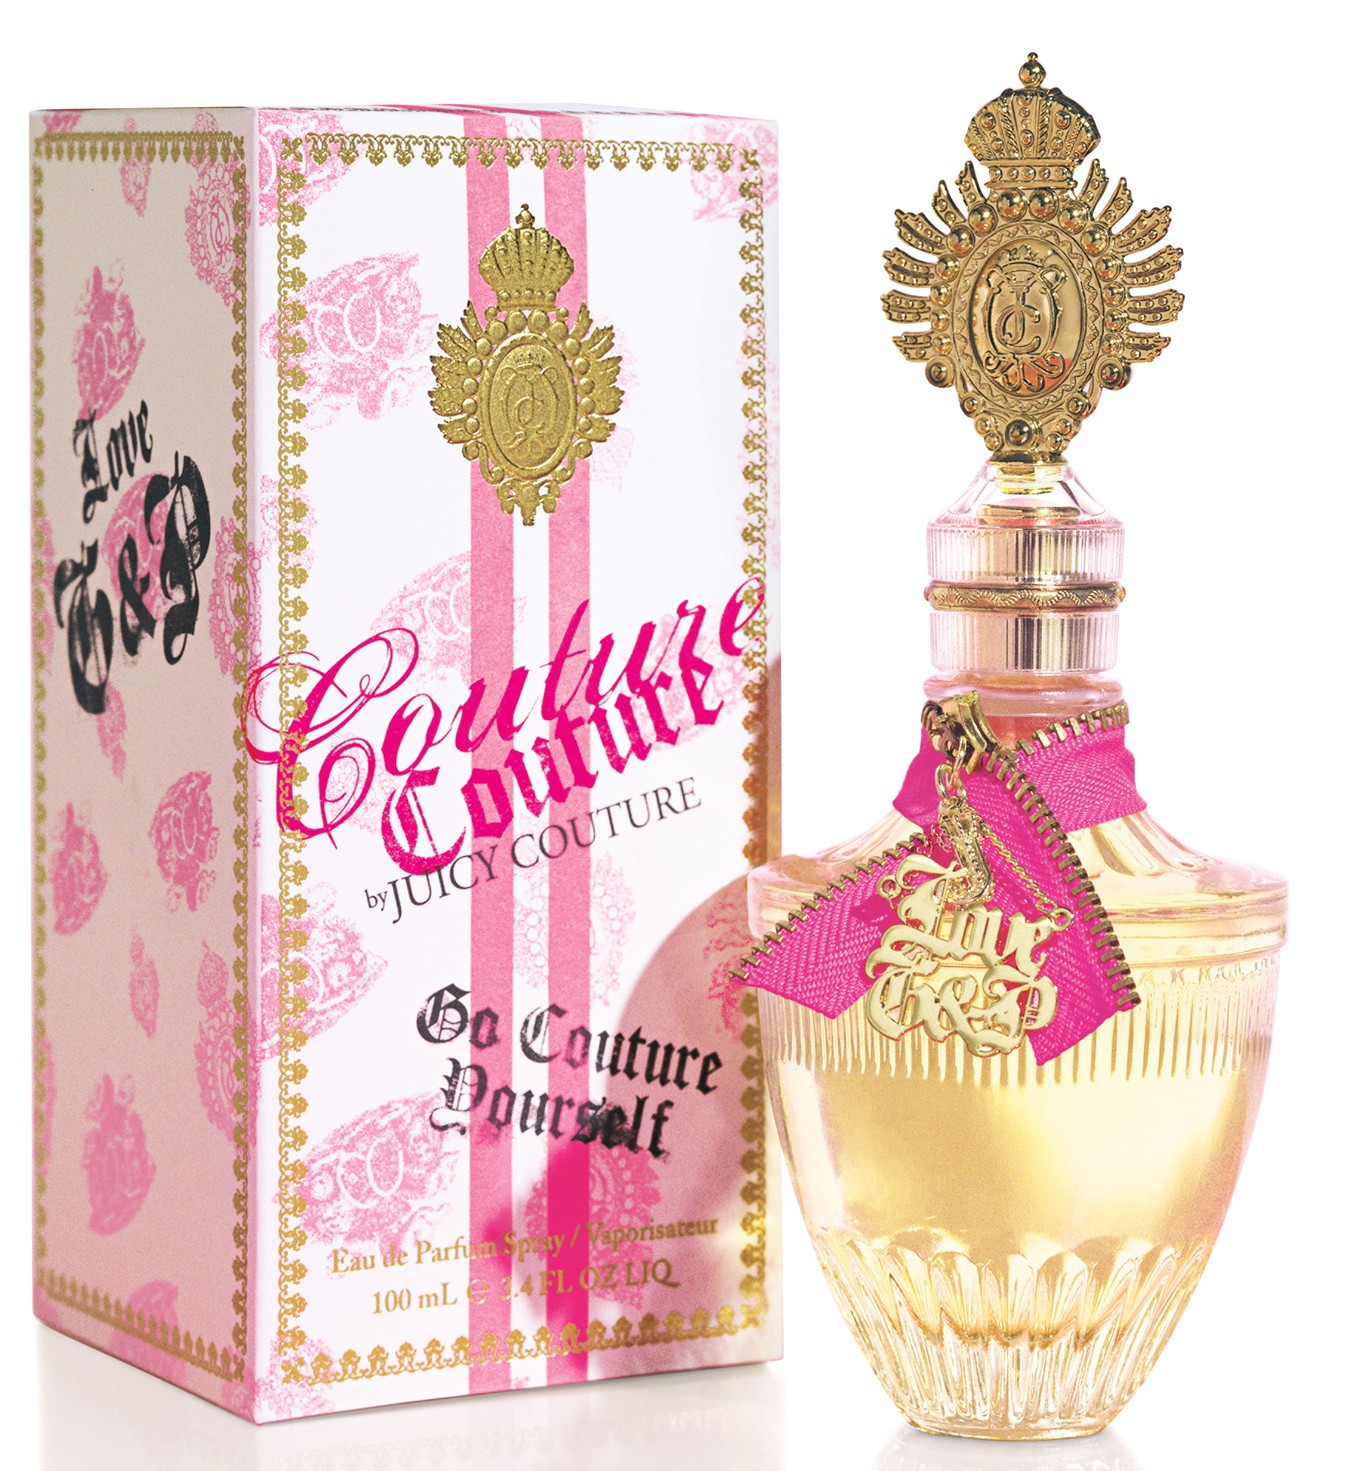 Juicy Couture Couture Couture for women